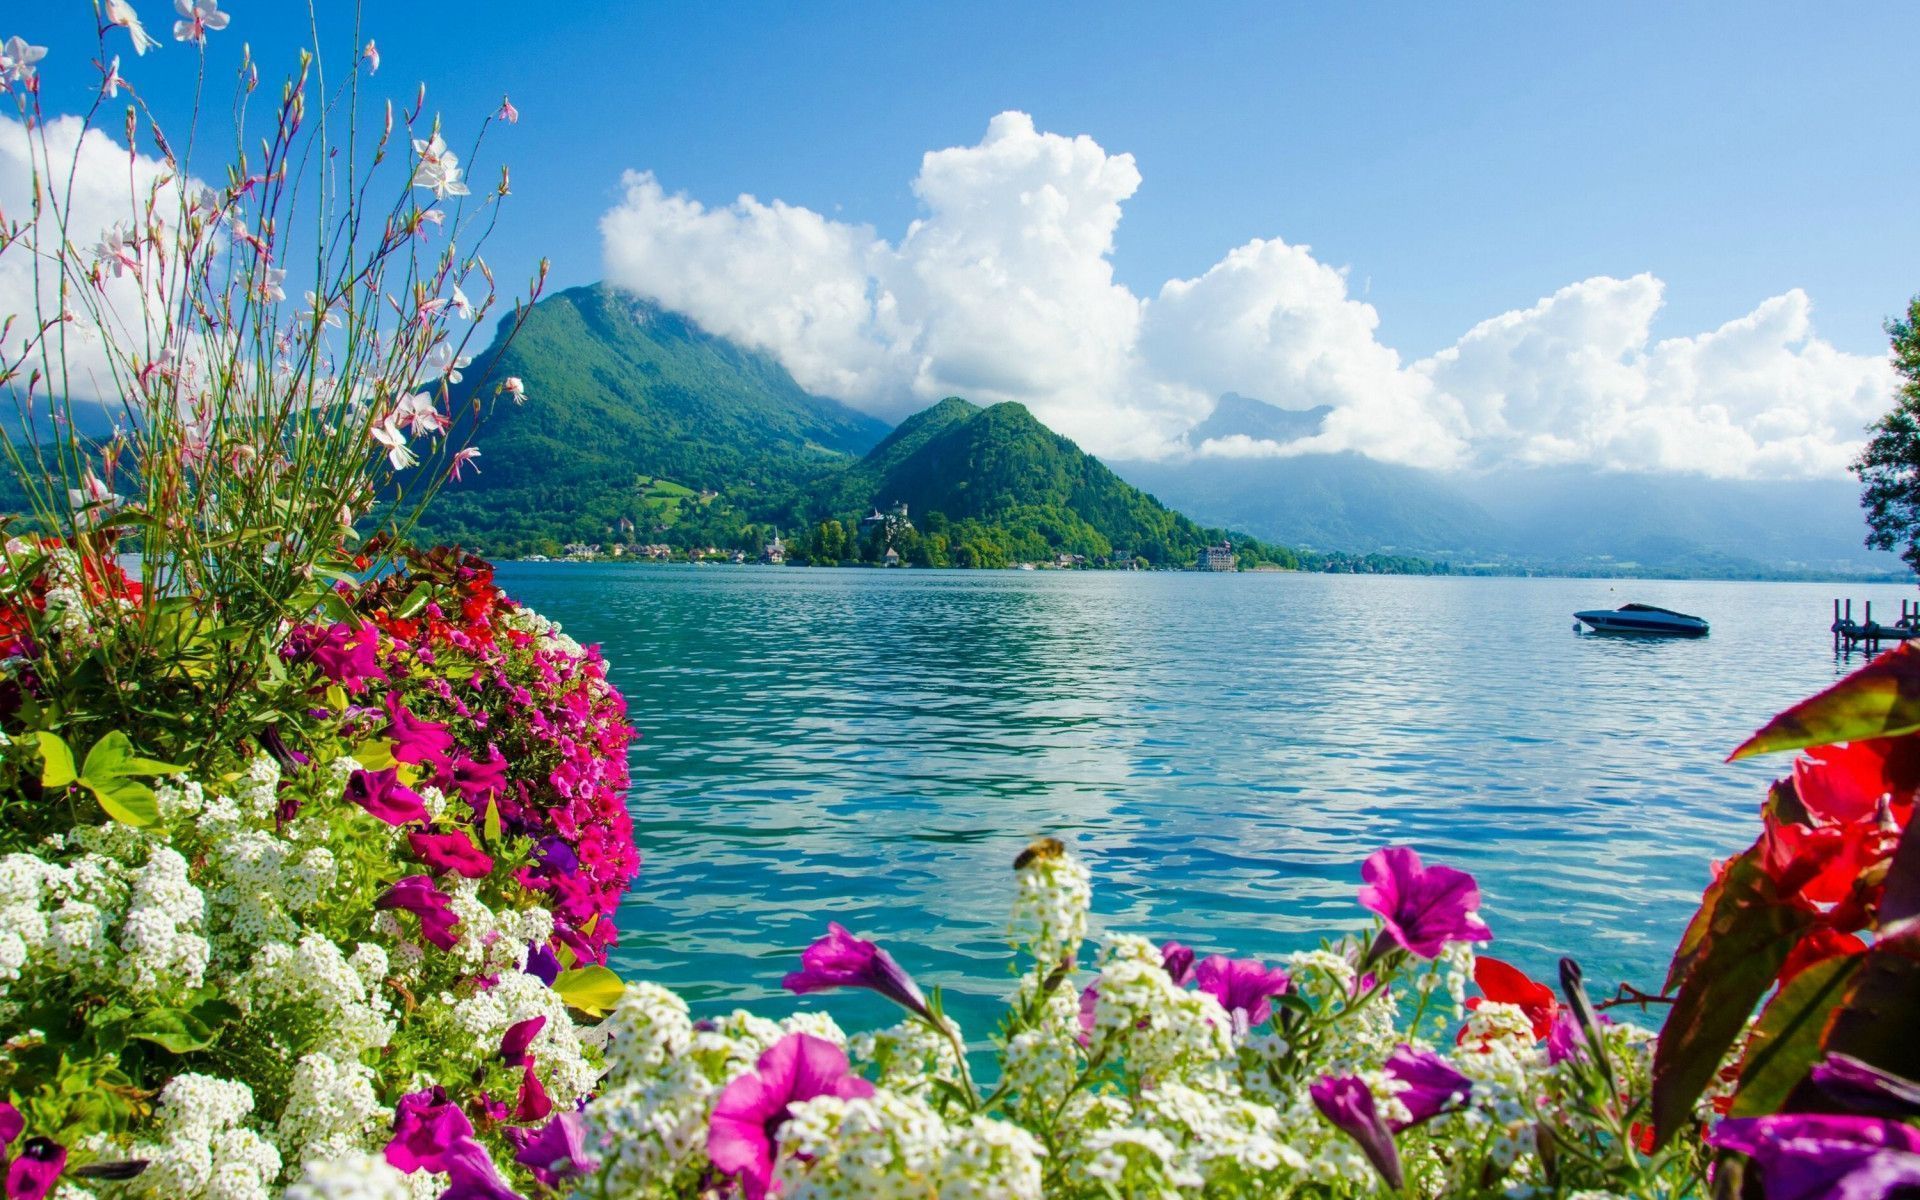 A boat on a lake surrounded by mountains and flowers - Nature, beautiful, 1920x1200